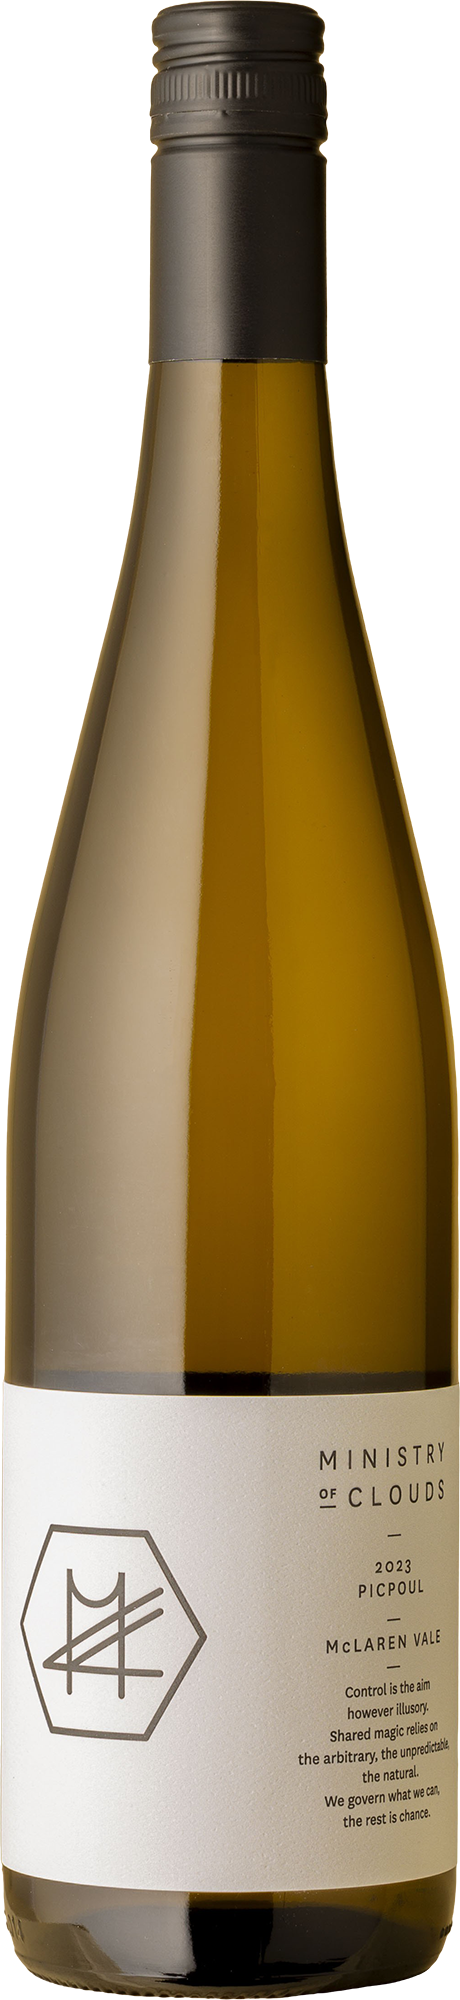 Ministry of Clouds - Picpoul Blanc 2022 White Wine